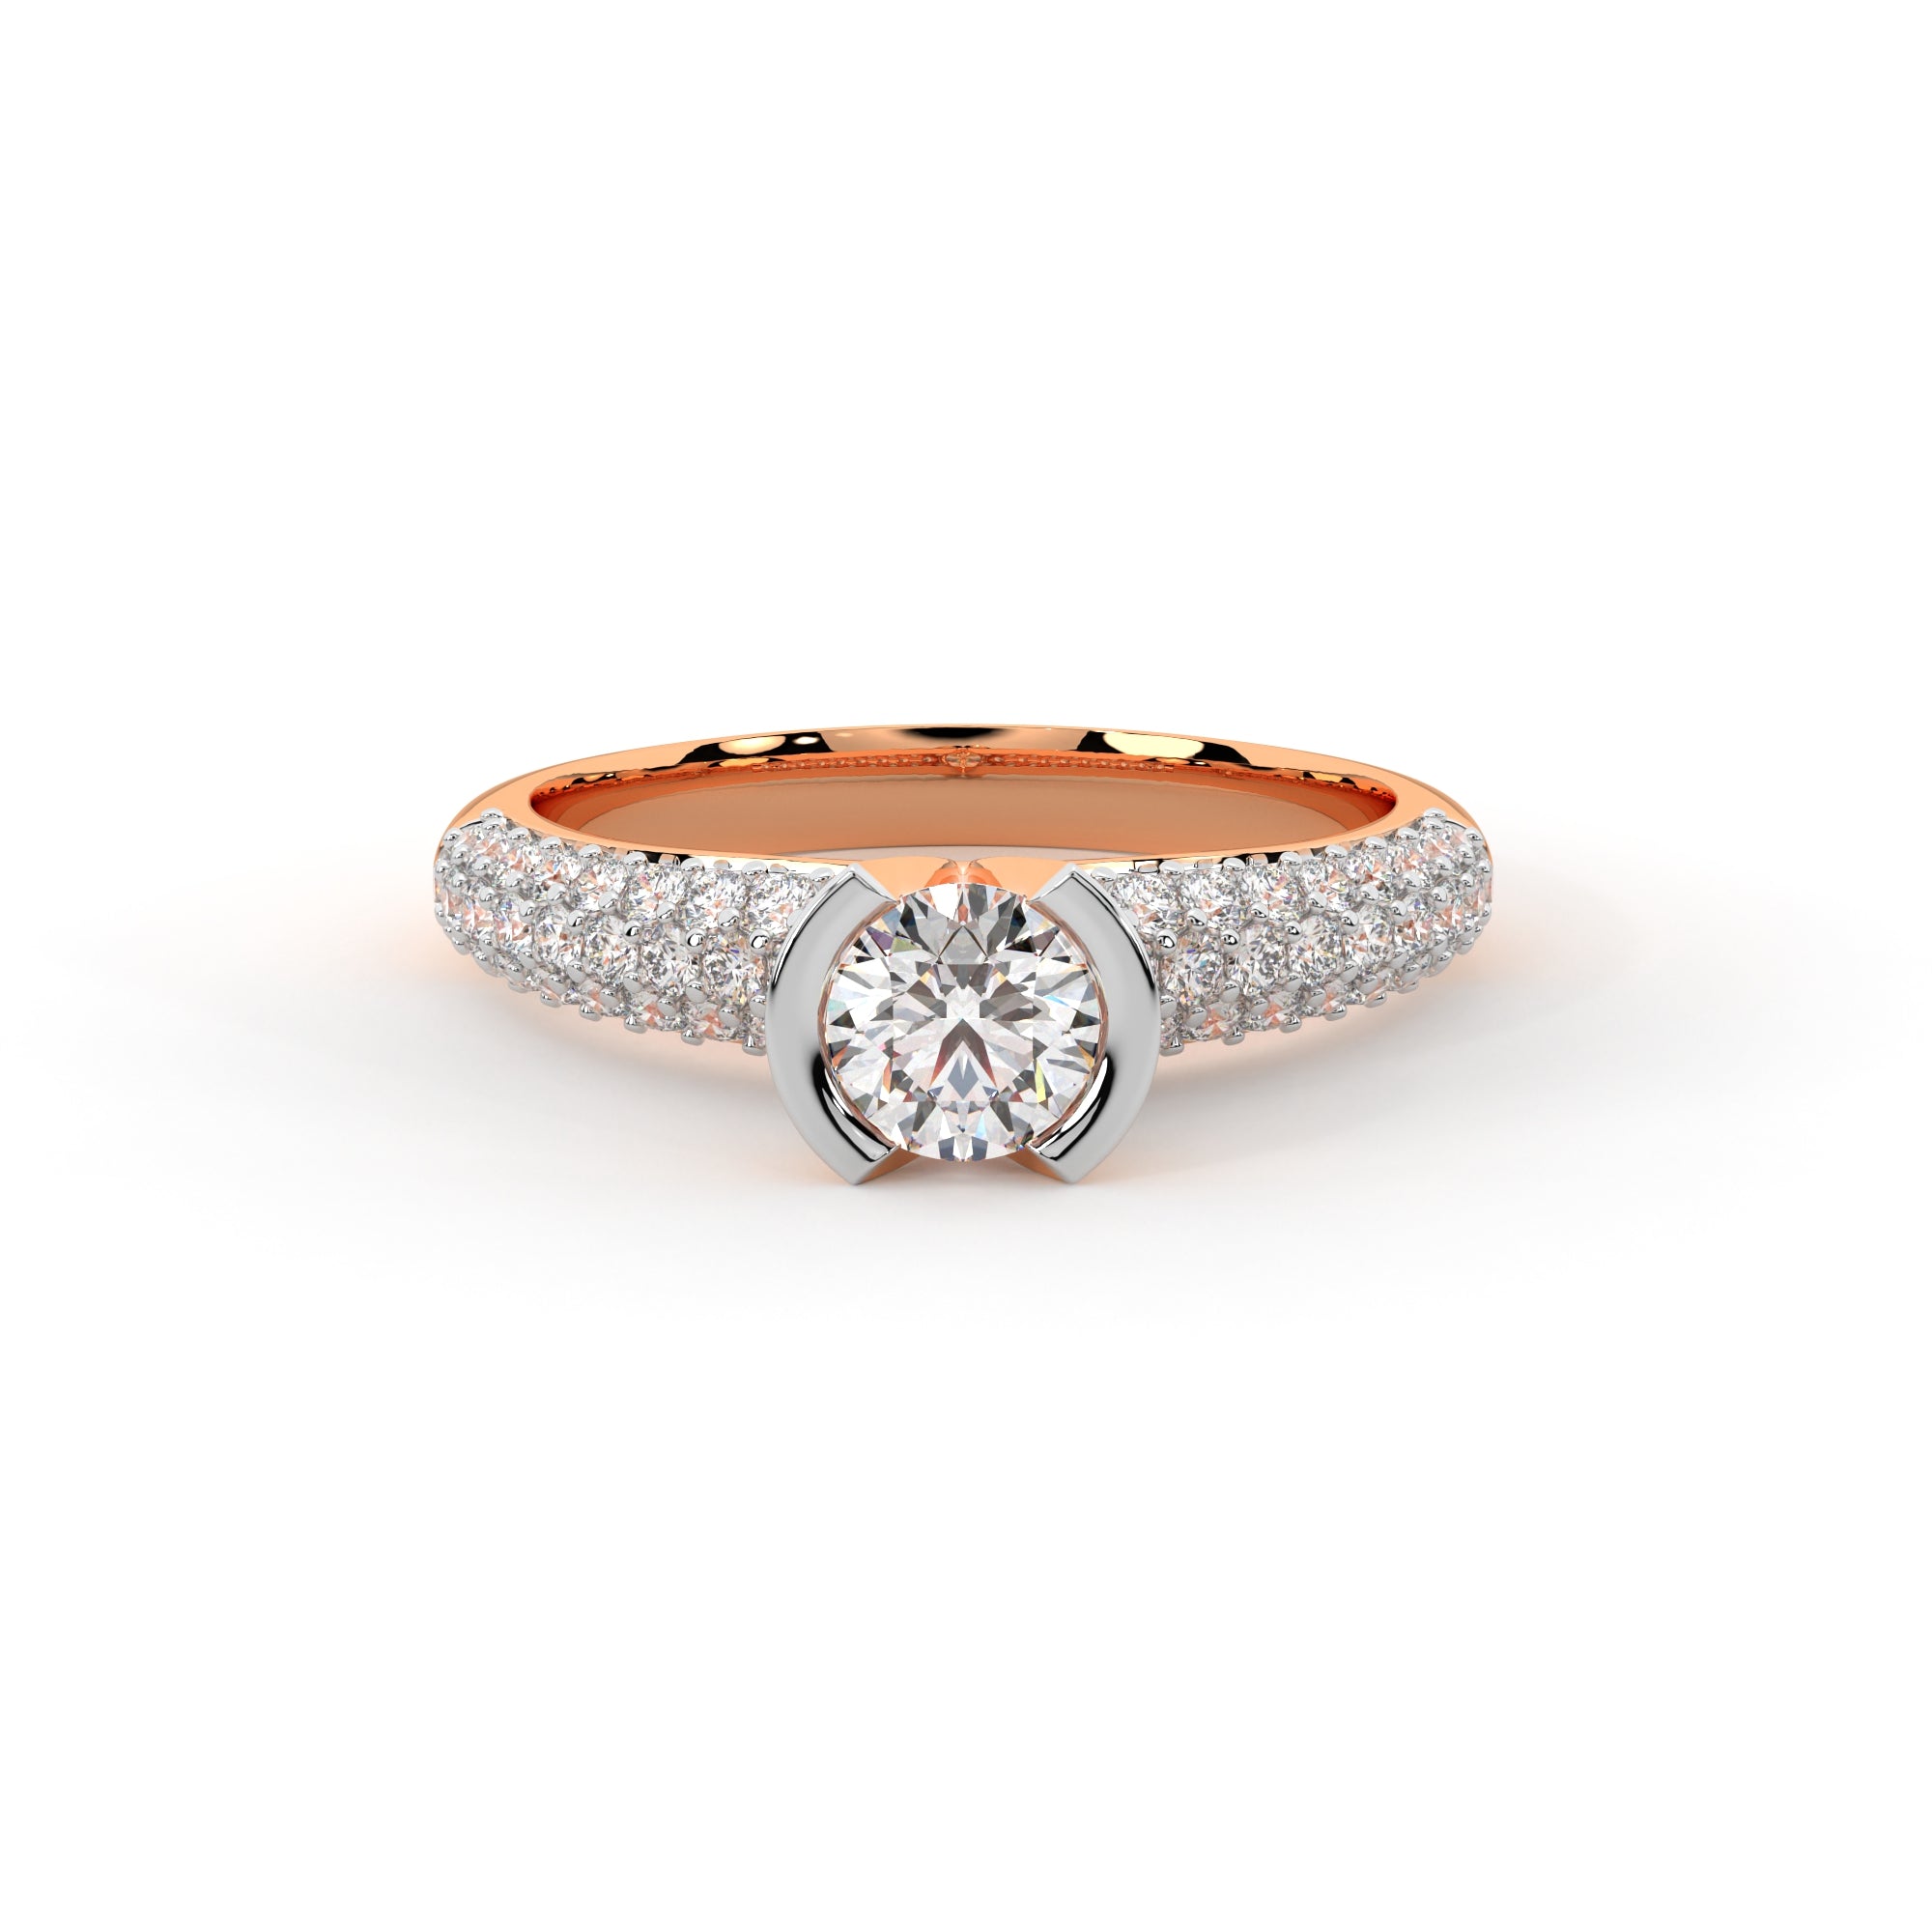 Dreamy Solitaire Ring